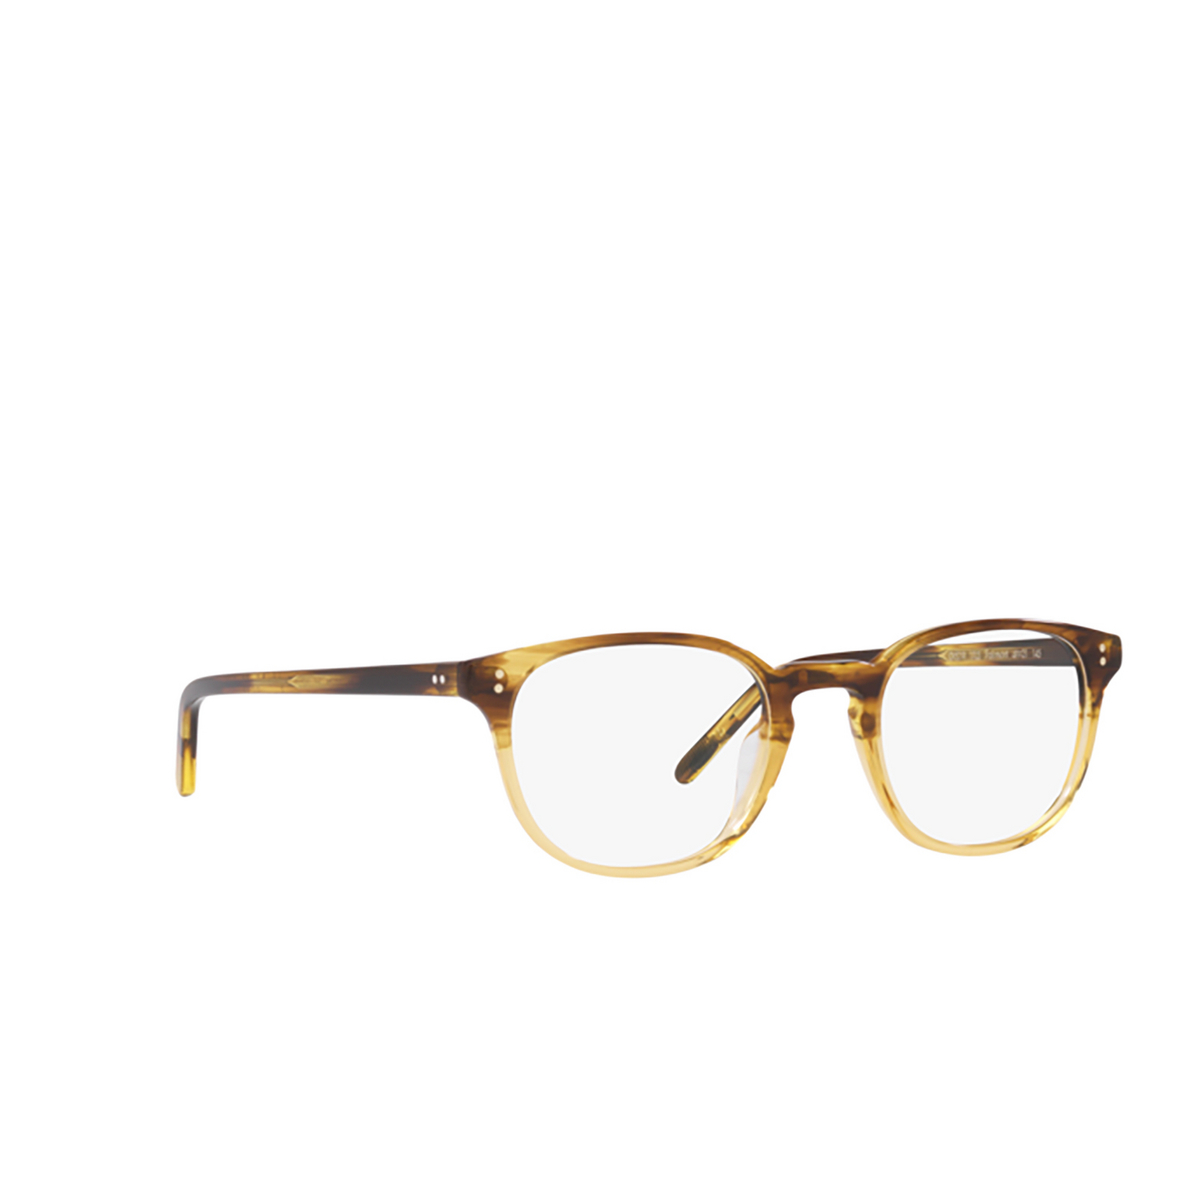 Oliver Peoples FAIRMONT Eyeglasses 1703 Canarywood Gradient - three-quarters view